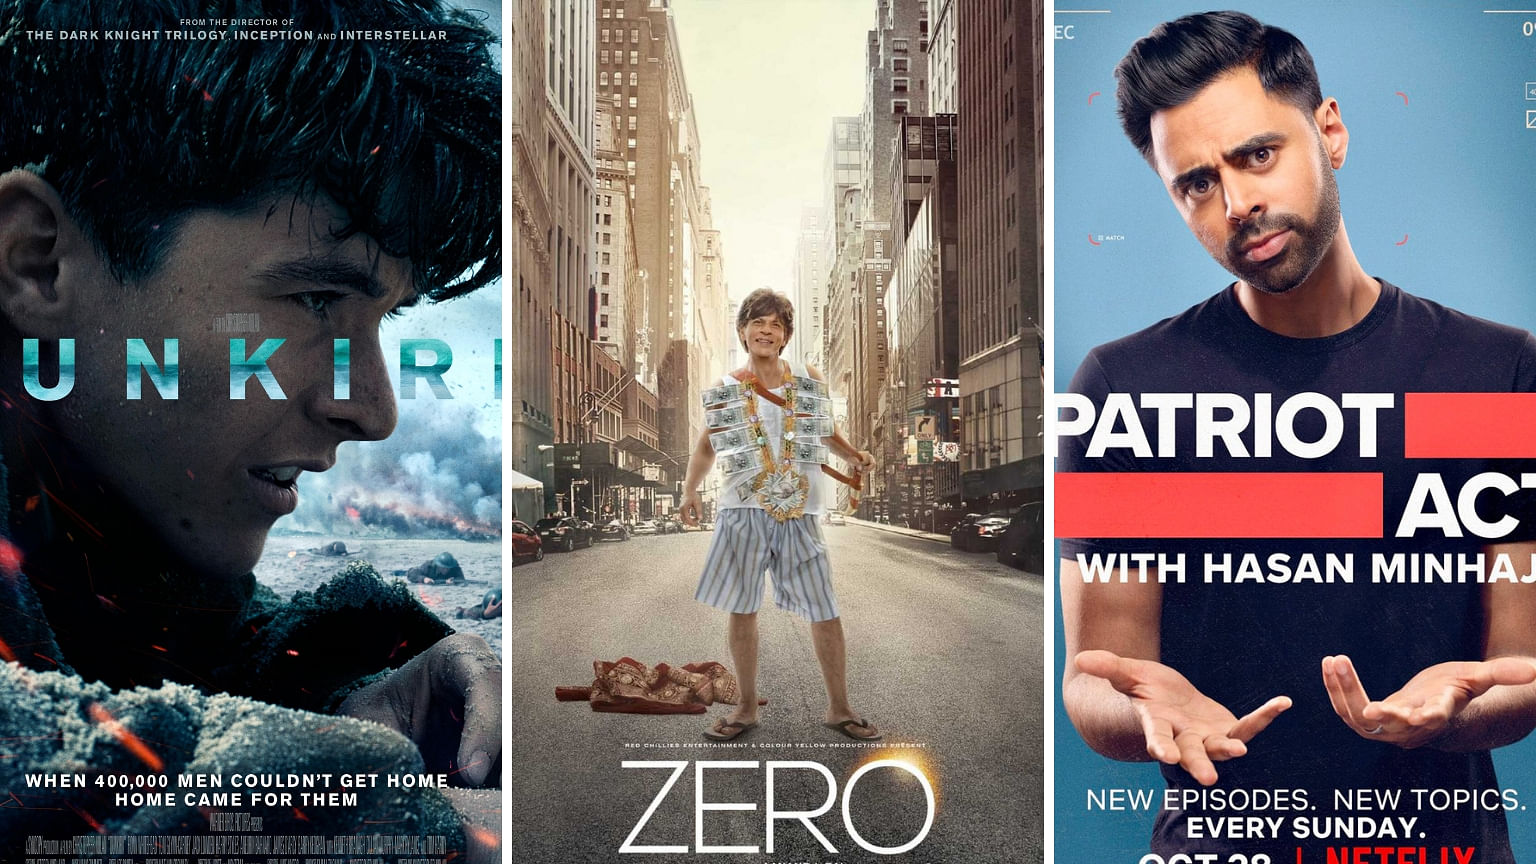 Netflix’s May content includes Christopher Nolan’s <i>Dunkirk</i> and Volume 3 of Hasan Minhaj’s <i>Patriot Act</i>.&nbsp;